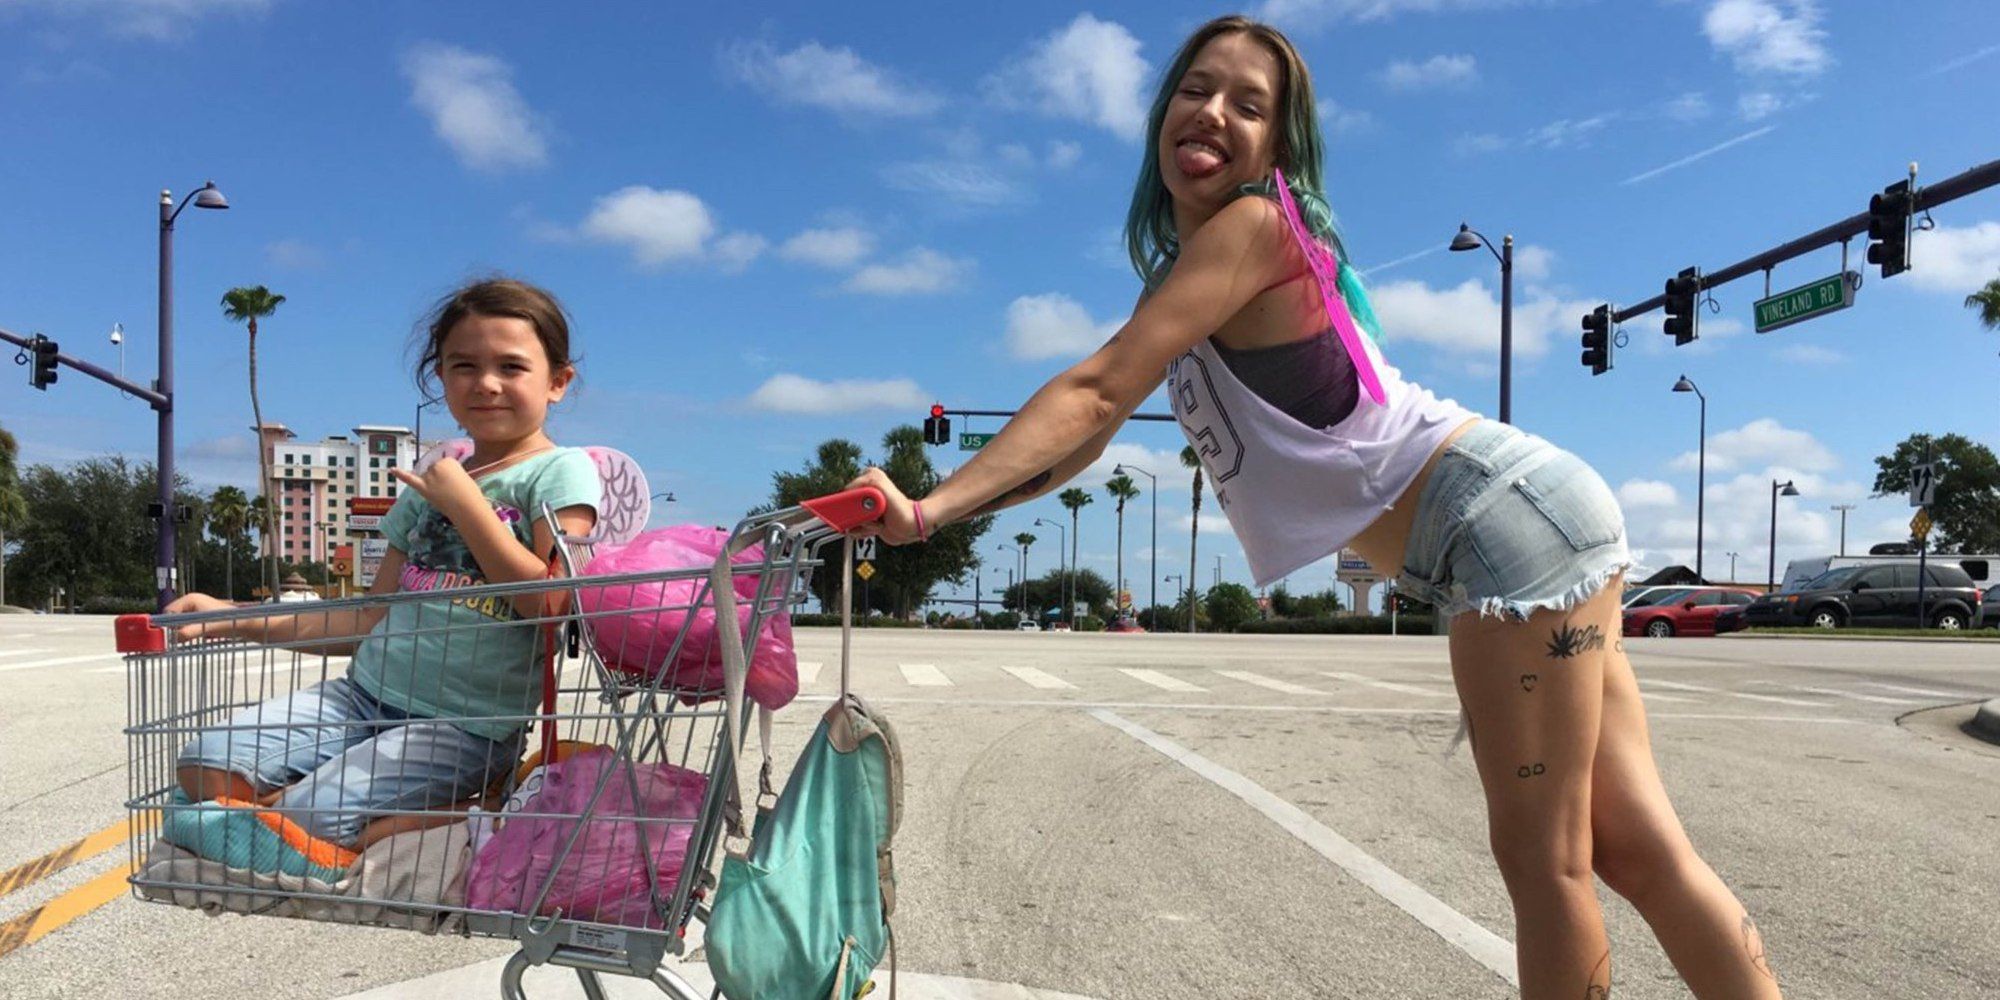 THE FLORIDA PROJECT 2017 GIRL IN TROLLEY CART